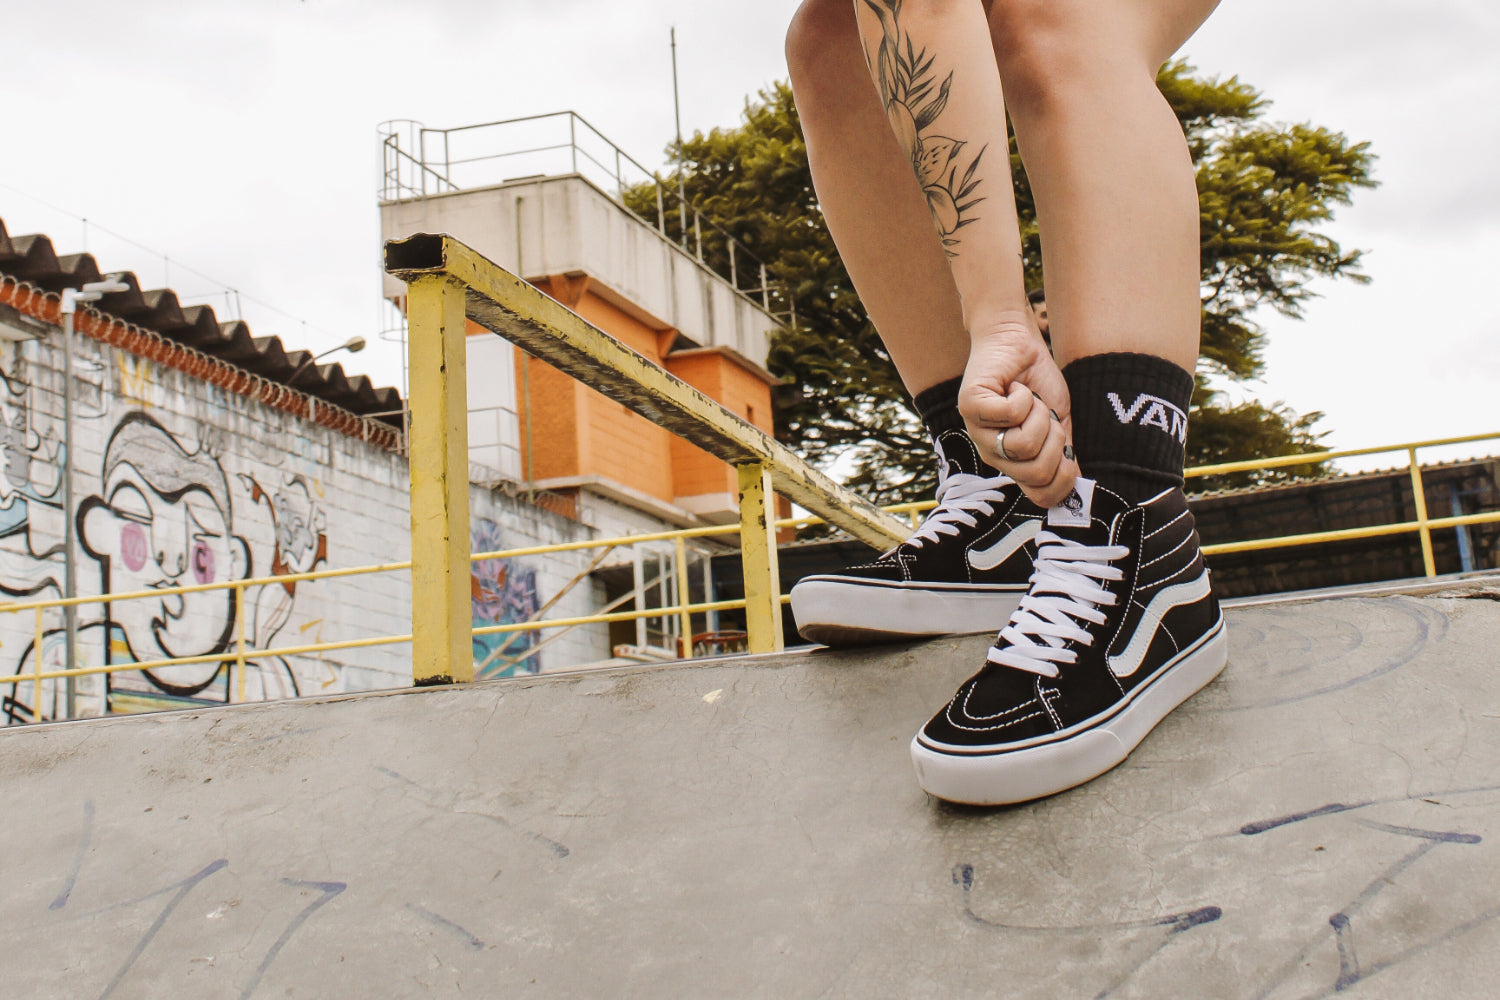 A skater wears Van socks and shoes in a skate park